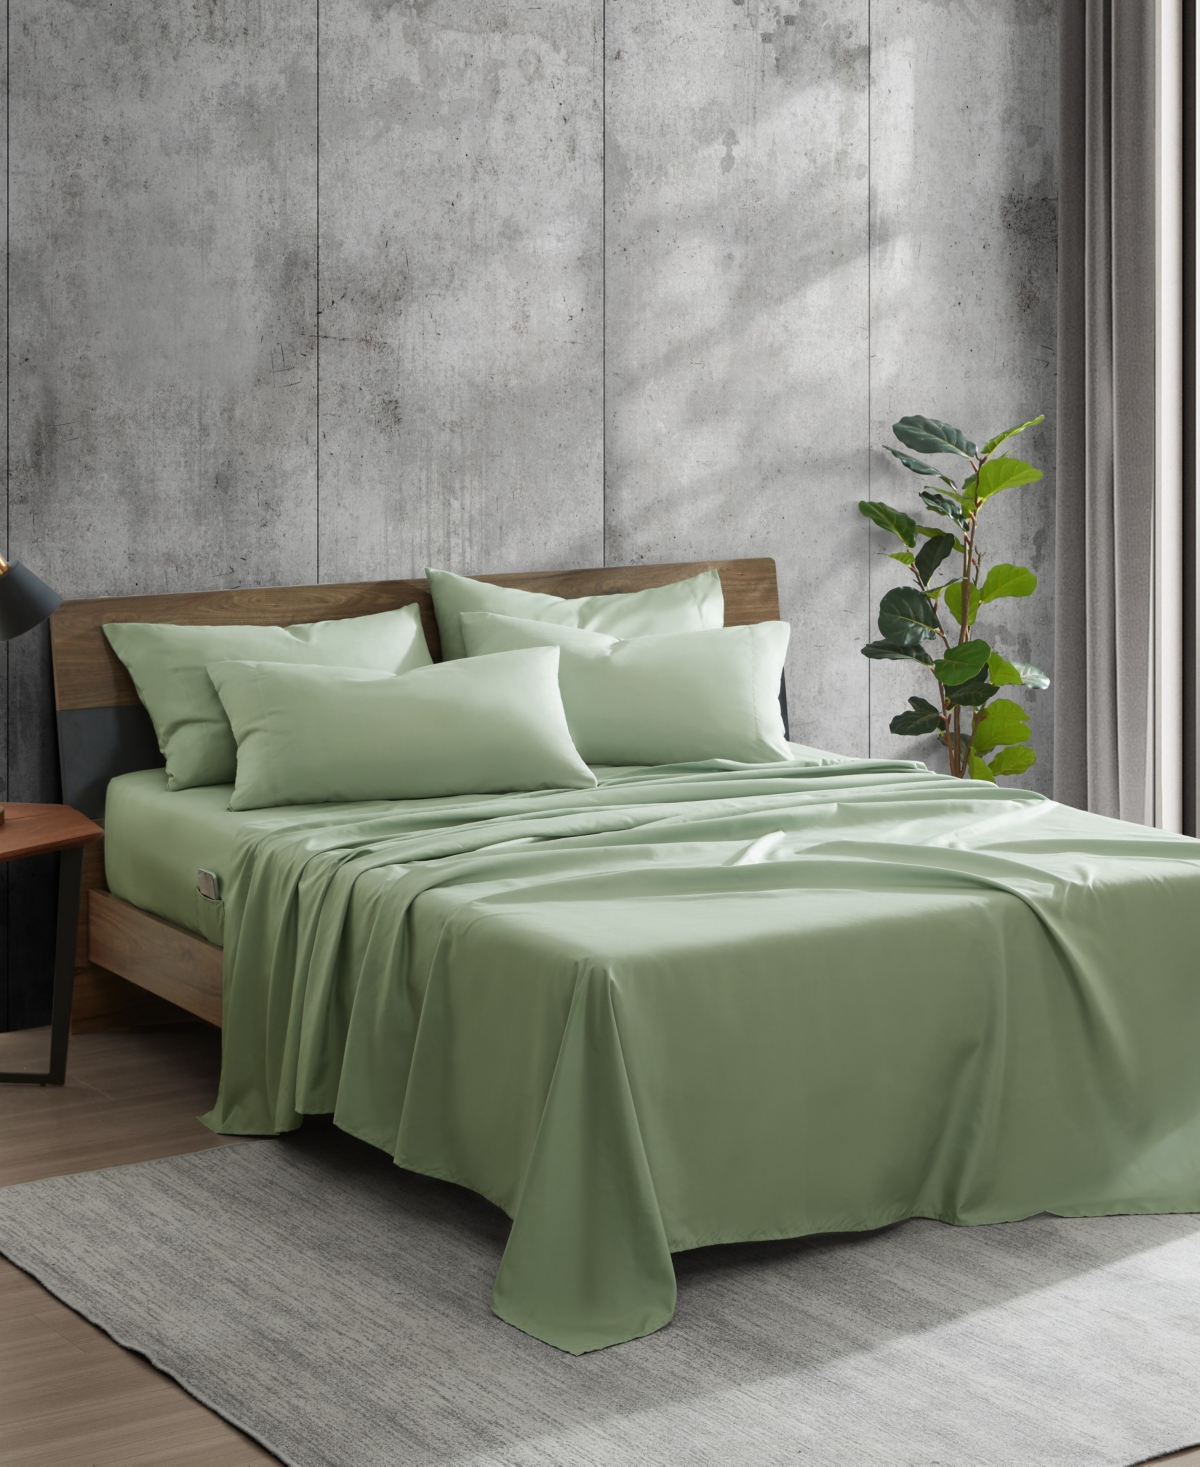 Kenneth Cole New York Solution Solid Microfiber 4 Piece Sheet Set, Twin In Sage Green